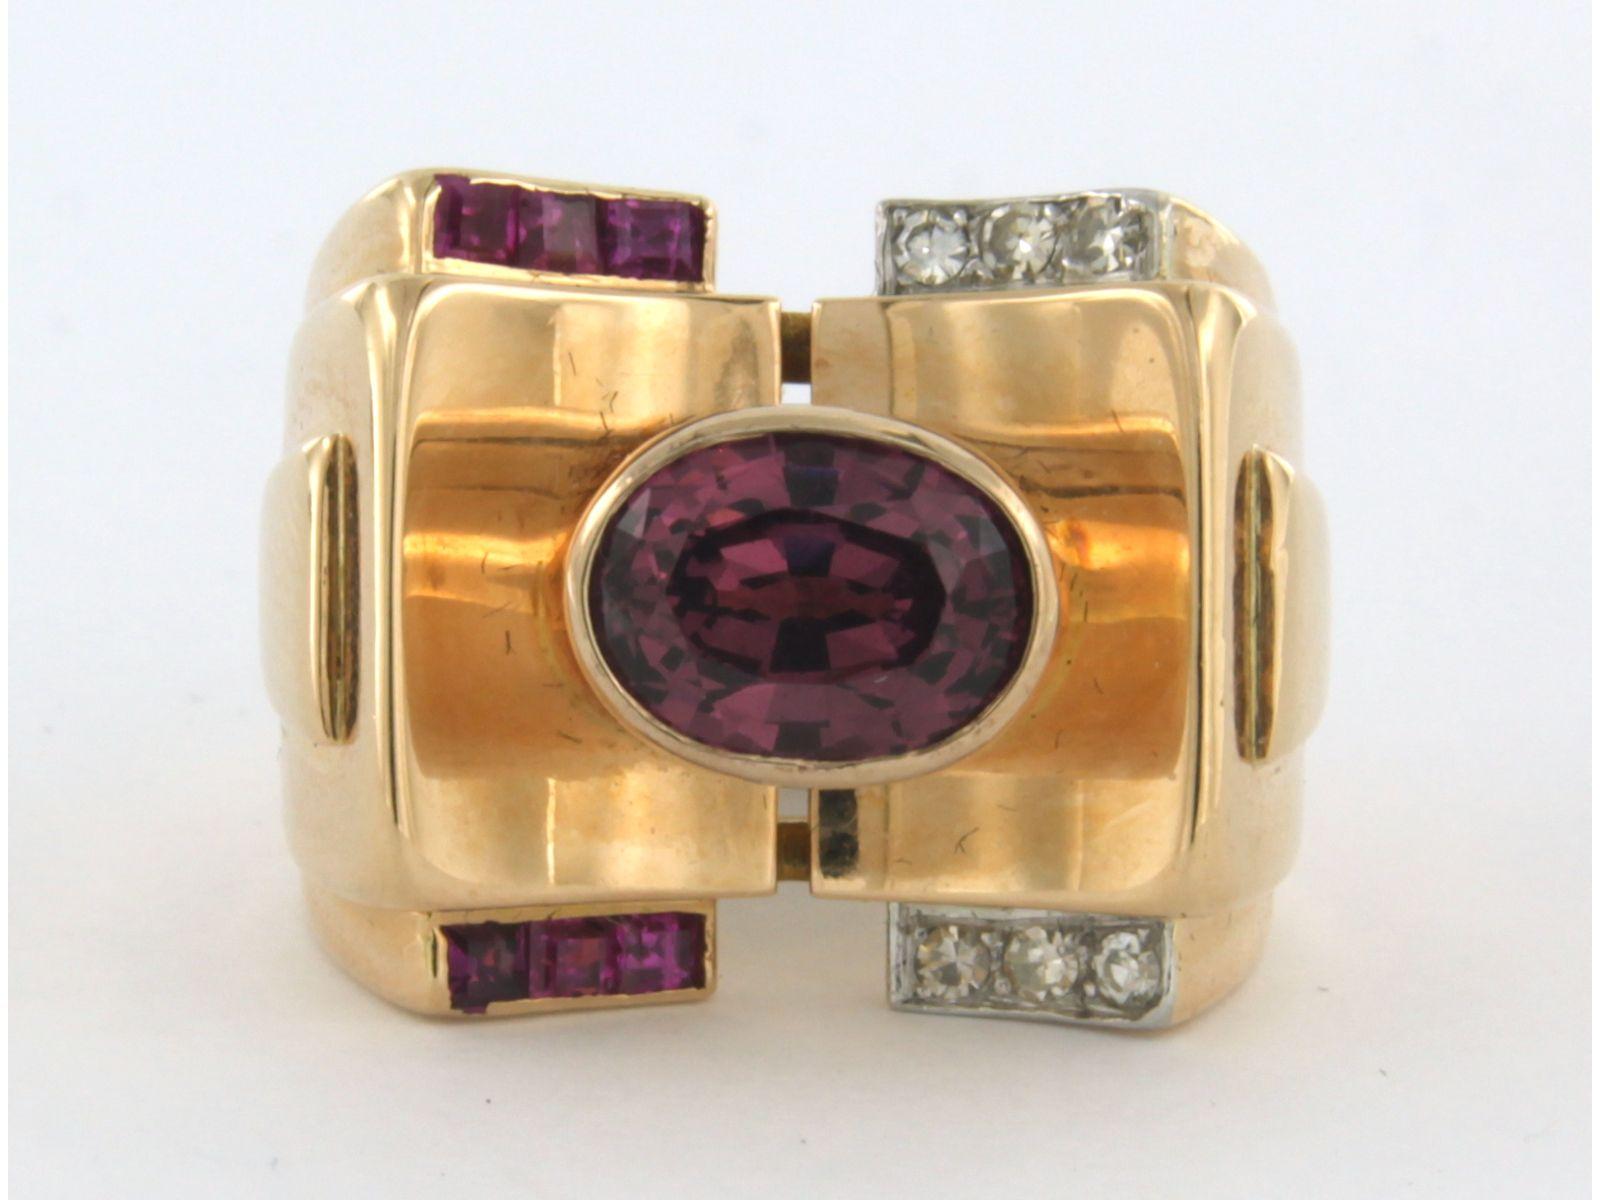 18 kt pink gold retro ring set with tourmaline, ruby ​​and single cut diamonds tot. 0.12 ct - F/G - VS/SI - ring size U.S. 6.5 - EU. 17(53)

detailed description:

the top of the ring is 1.6 cm wide by 9.7 mm high

weight 15.9 grams

ring size U.S.